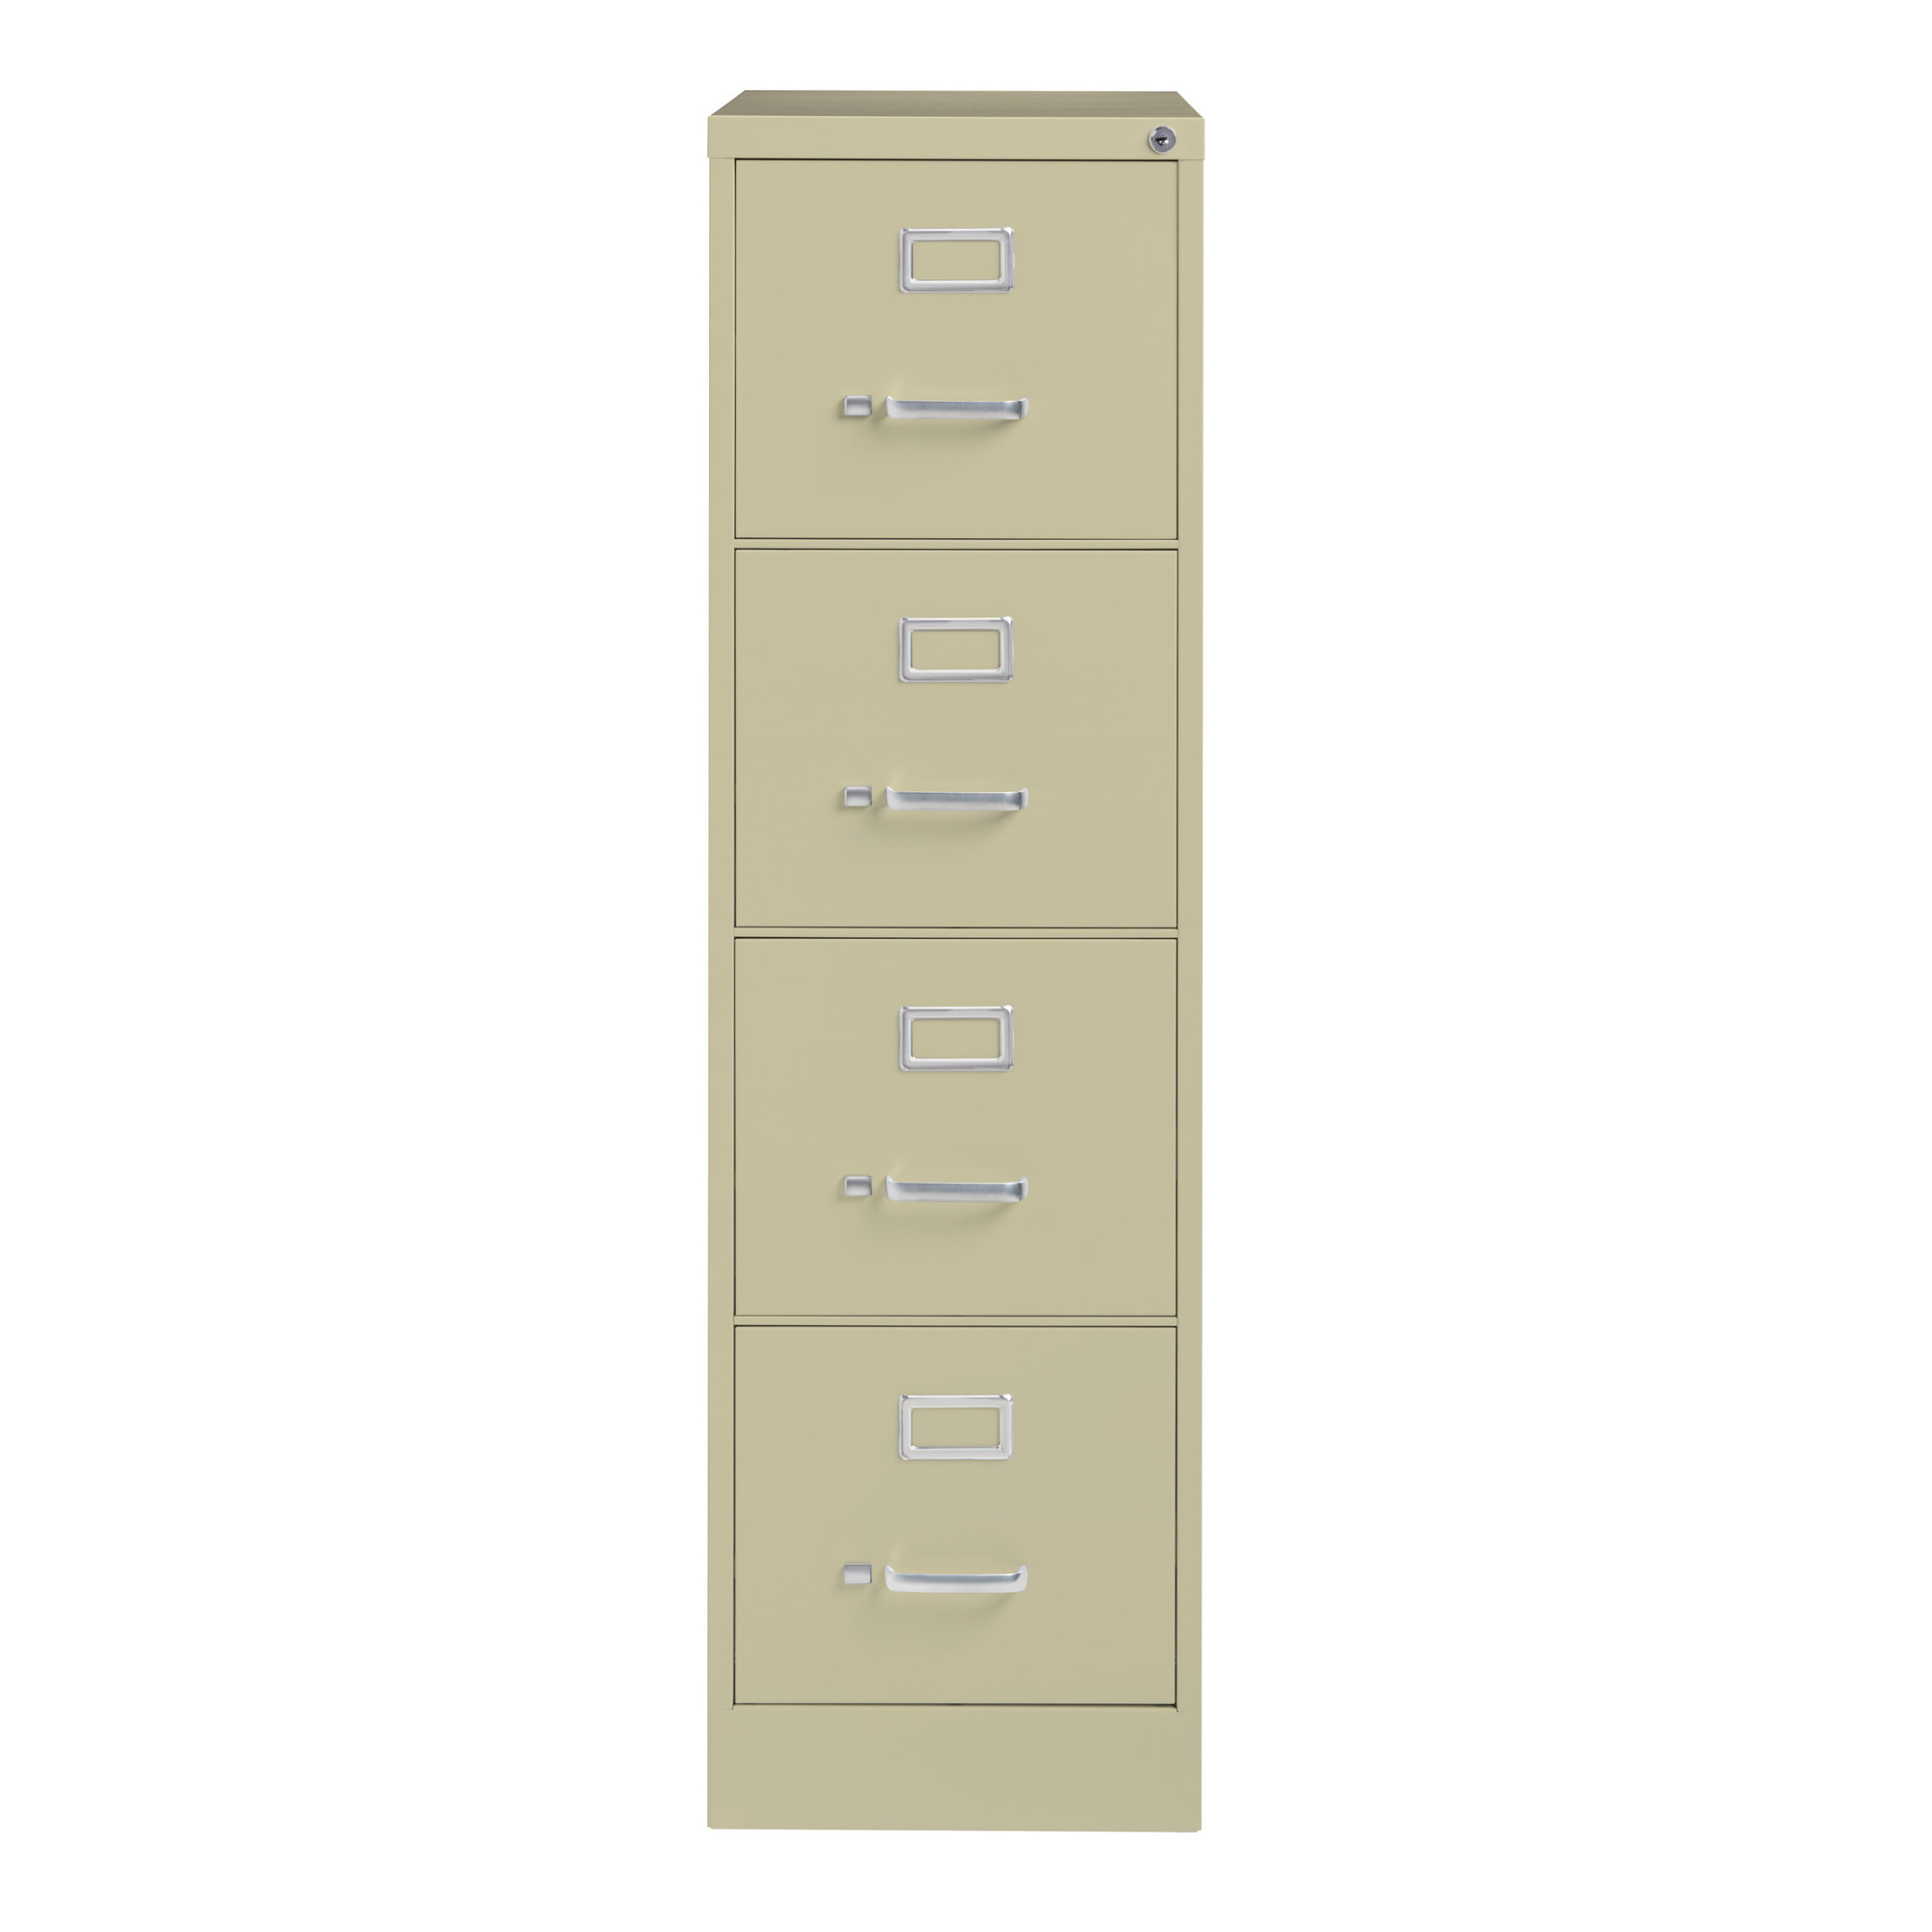 Hirsh Industries, 4 Drawer Letter W File Cabinet, Commercial Grade, Width 15 in, Depth 25 in, Height 52 in, Model 17545